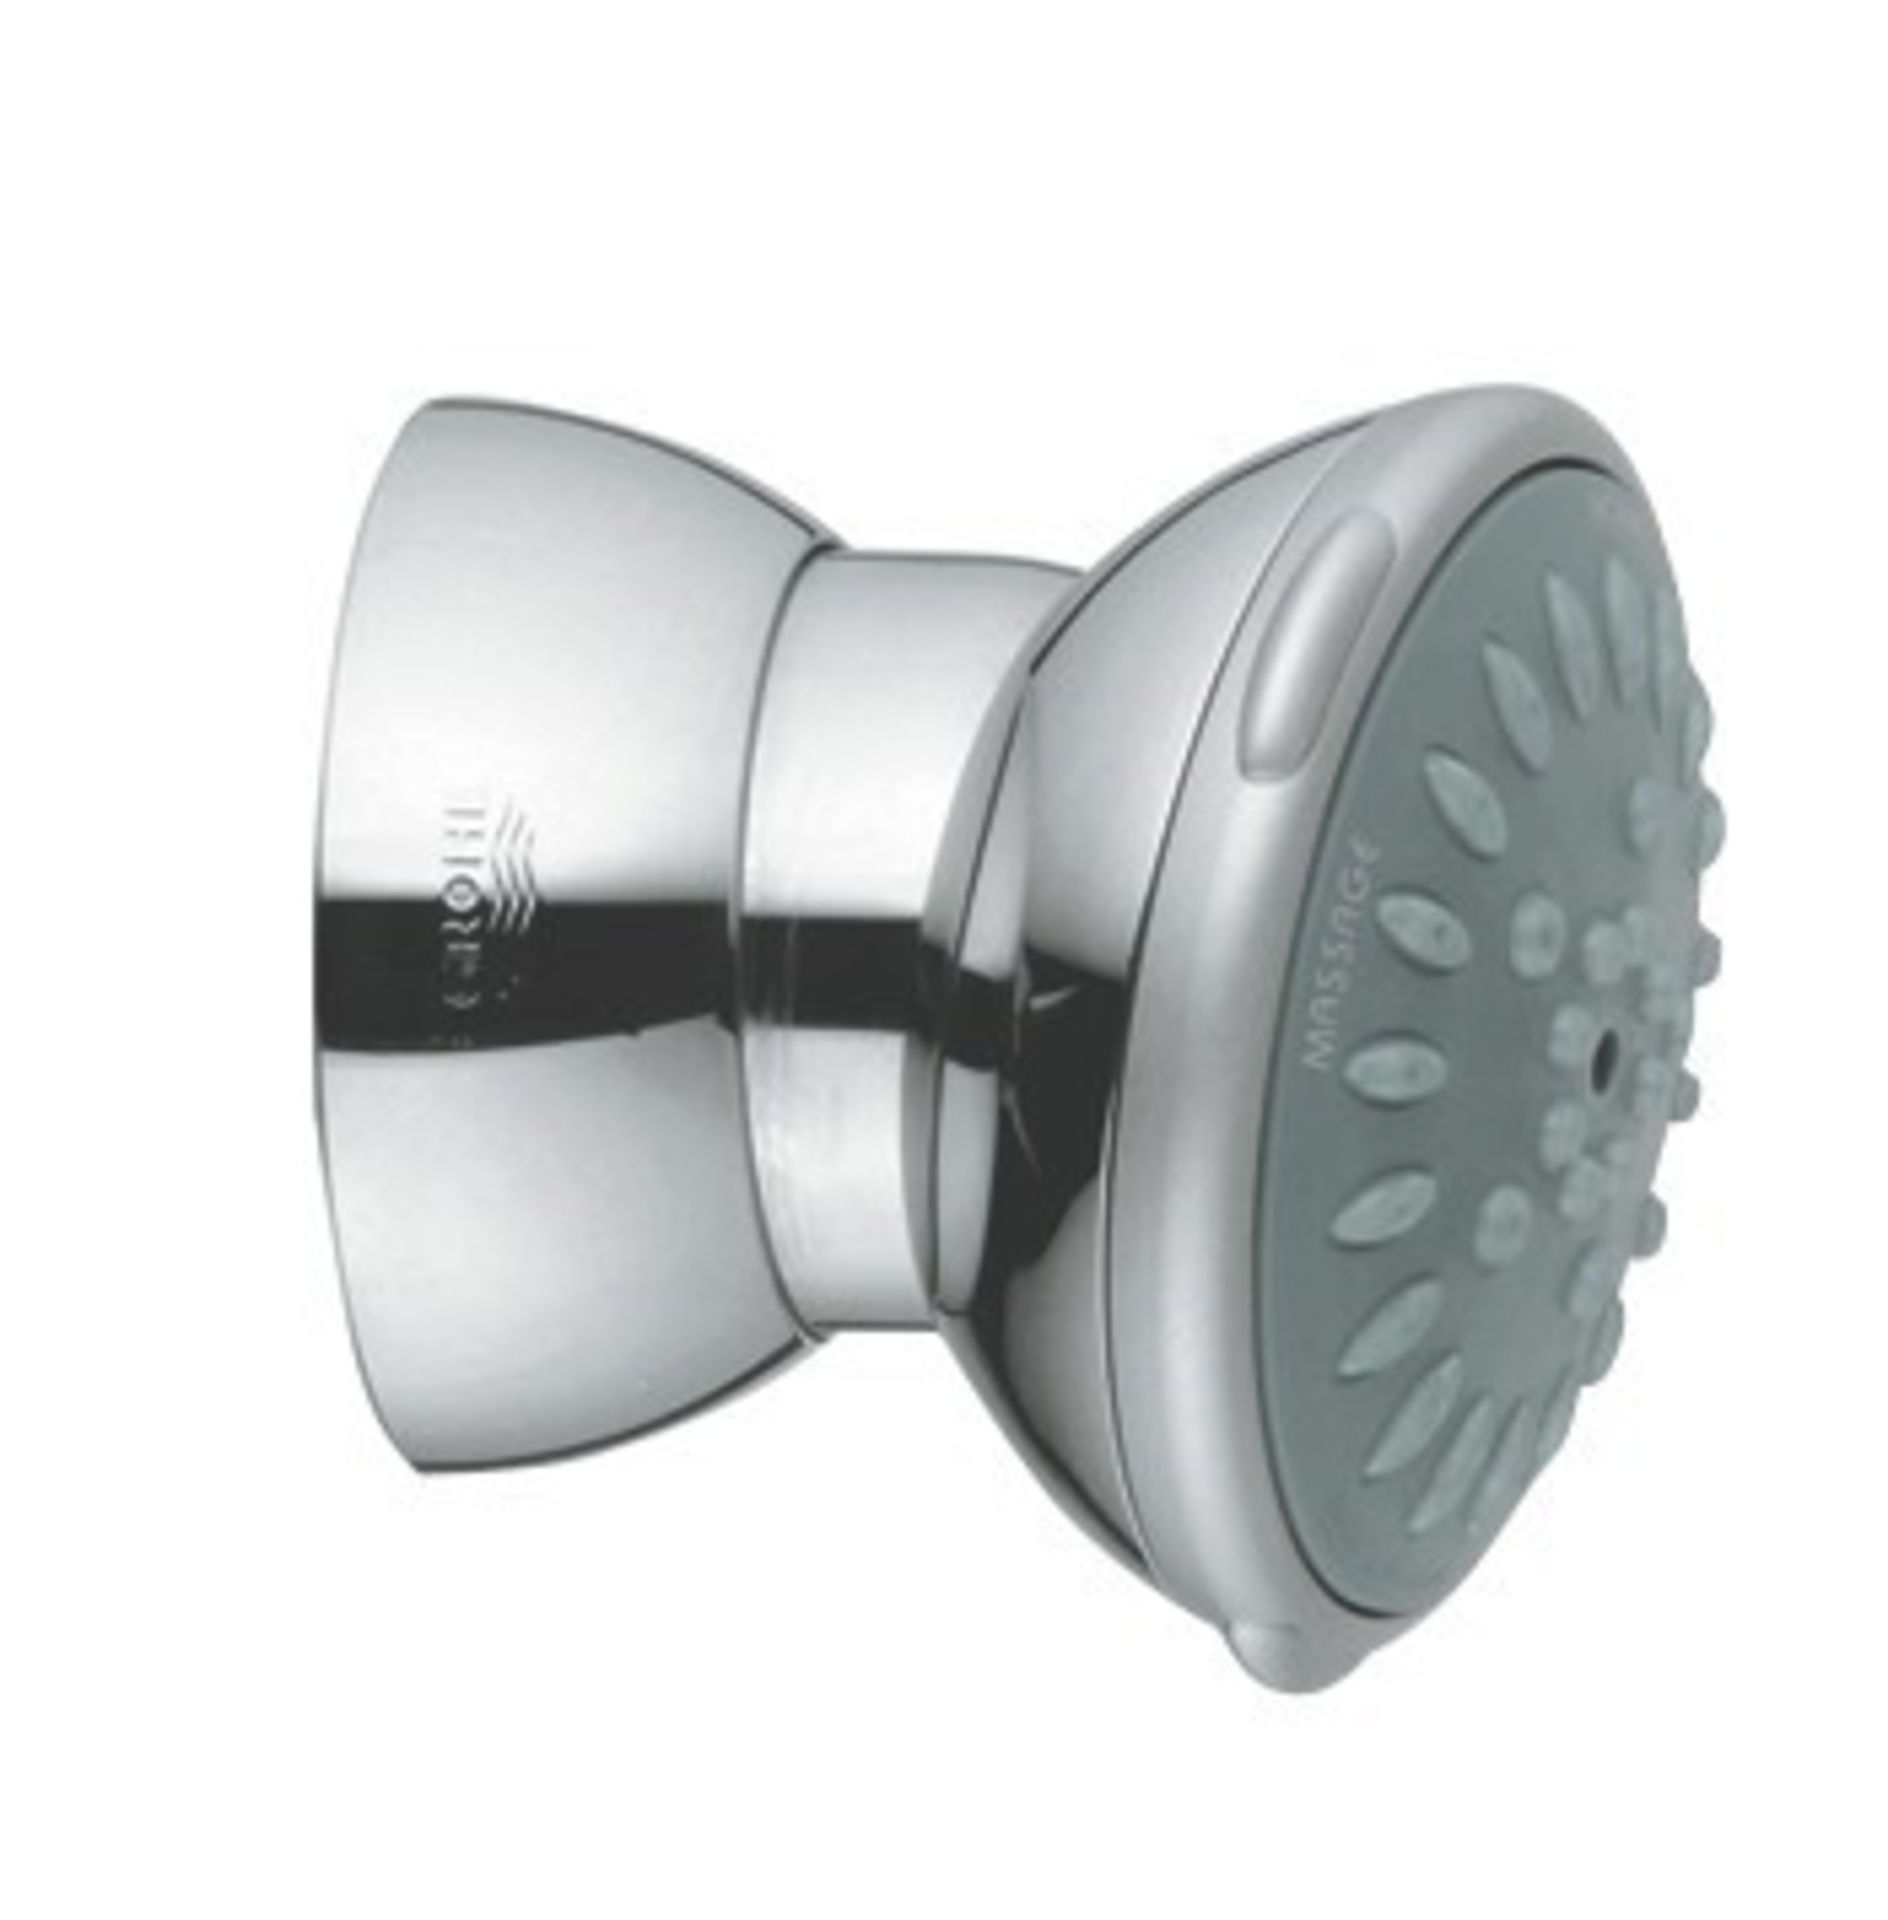 1 x Grohe Movario Side Shower Massage - Chrome Finish - Model: 28517000 - New & Boxed - CL088 - Loca - Image 2 of 4